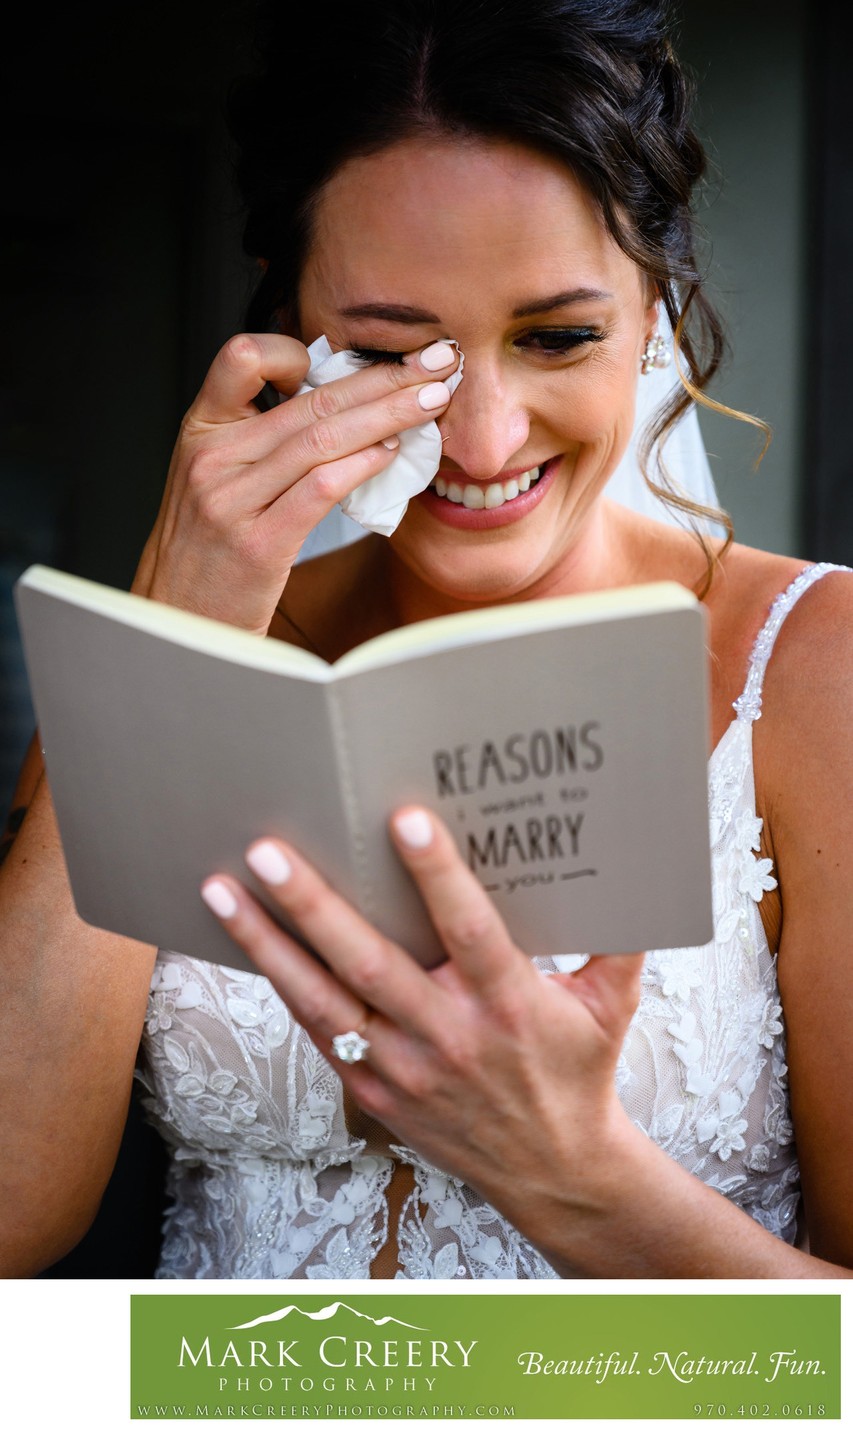 Reasons I Want to Marry You Book for wedding